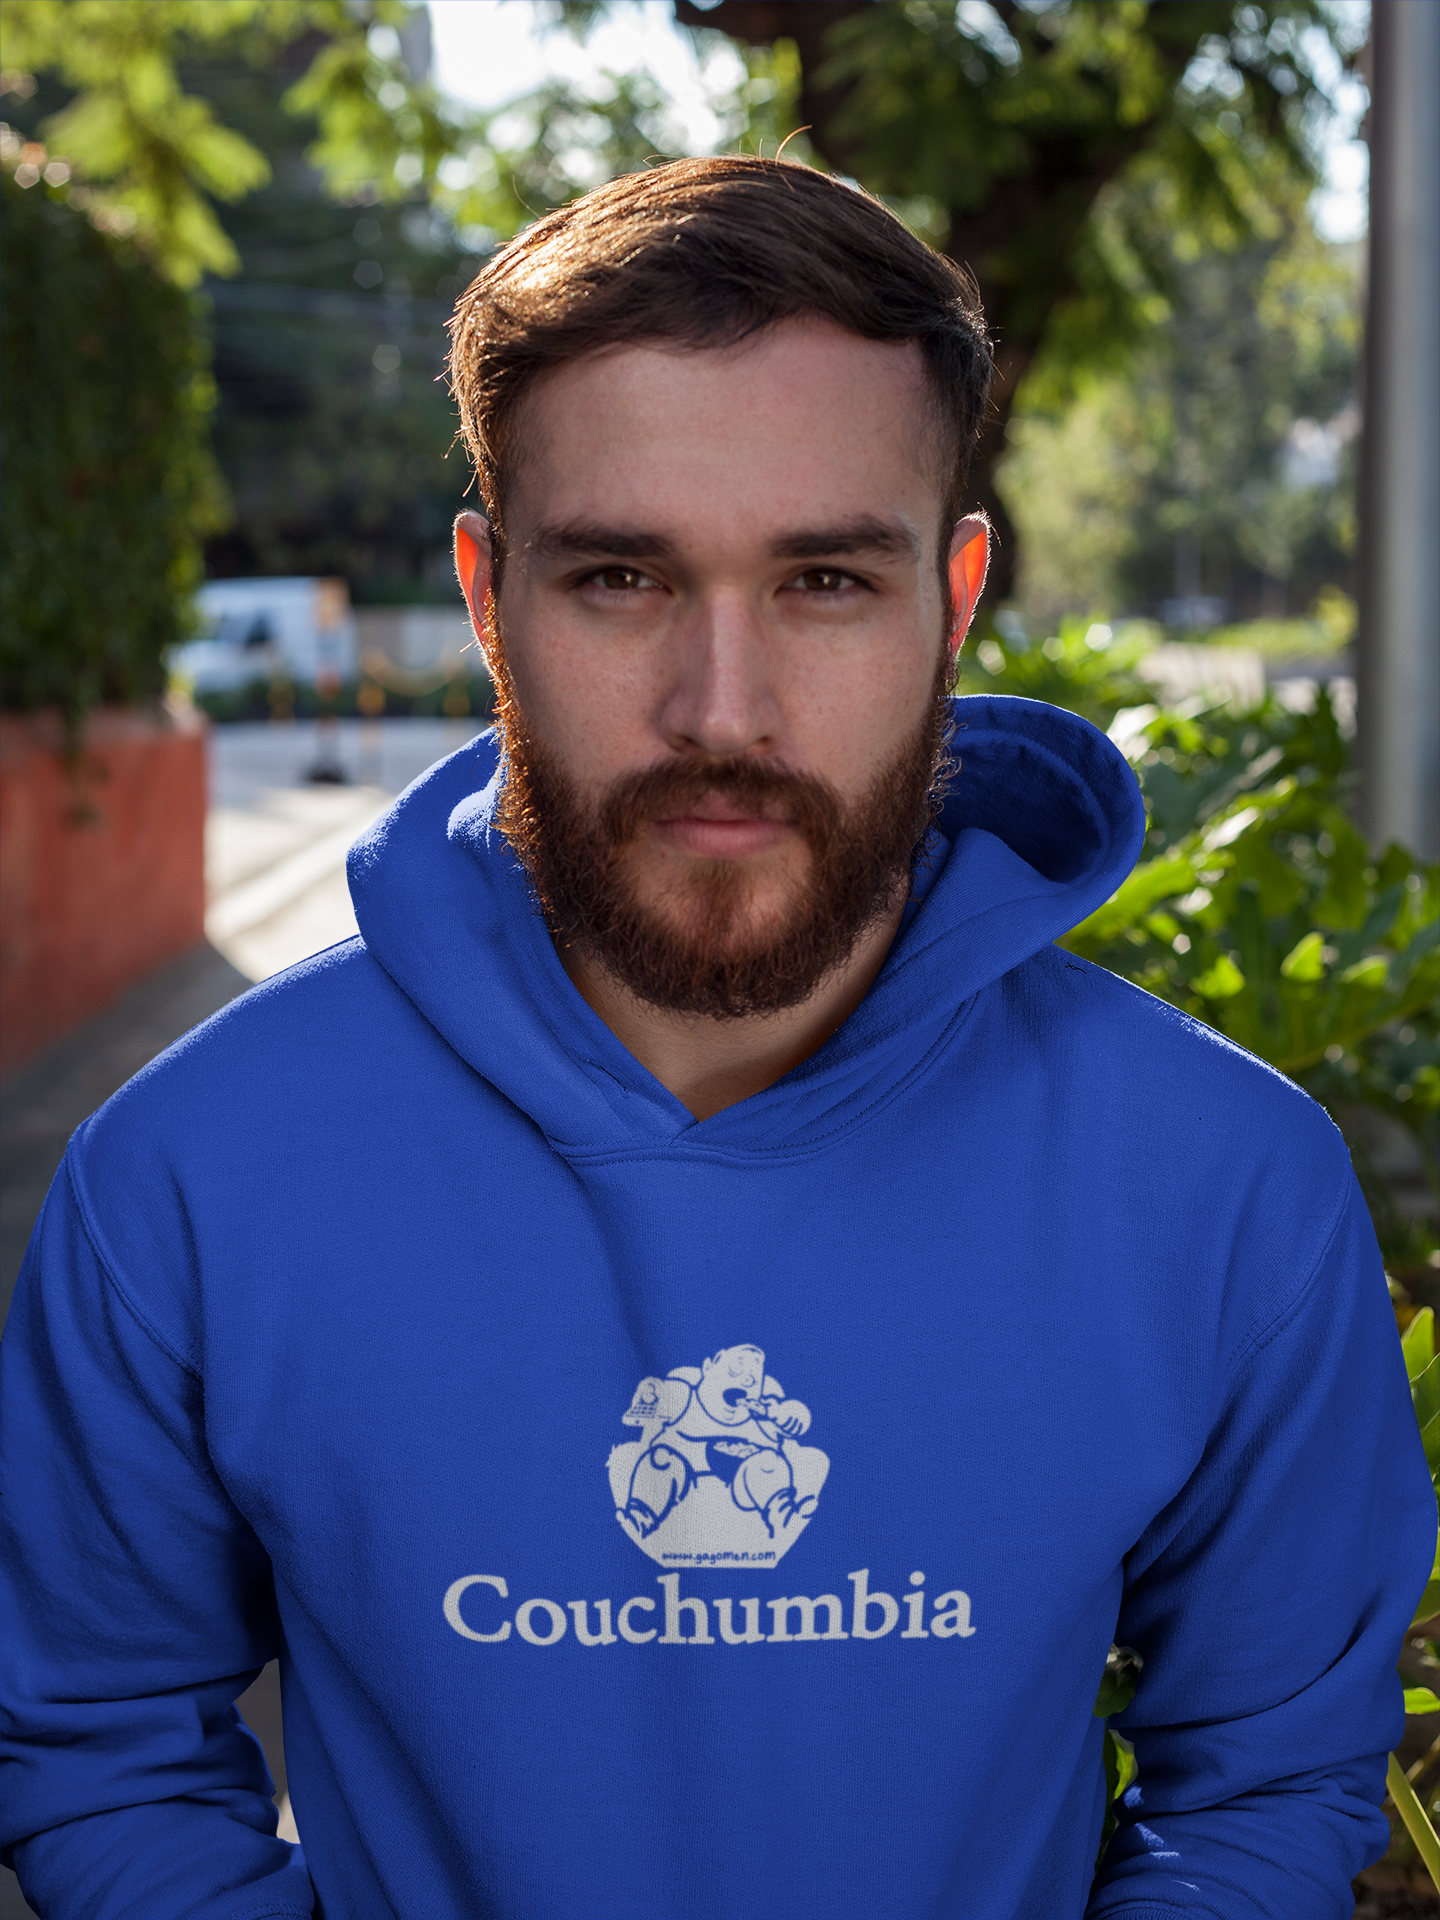 funny columbia hoodie, funny columbia logo, spoof hoodie, meme hoodie, Spoof hoodie, funny hoodie, parody hoodie, outdoor hoodie, funny dads gift, pinoy spoof hoodie, funny camping hoodie, funny hiking hoodie, parody hoodie, funny fishing hoodie, funny offroad hoodie, spoof hoodie, funny hunting hoodie, meme hoodie, brand parody hoodie,